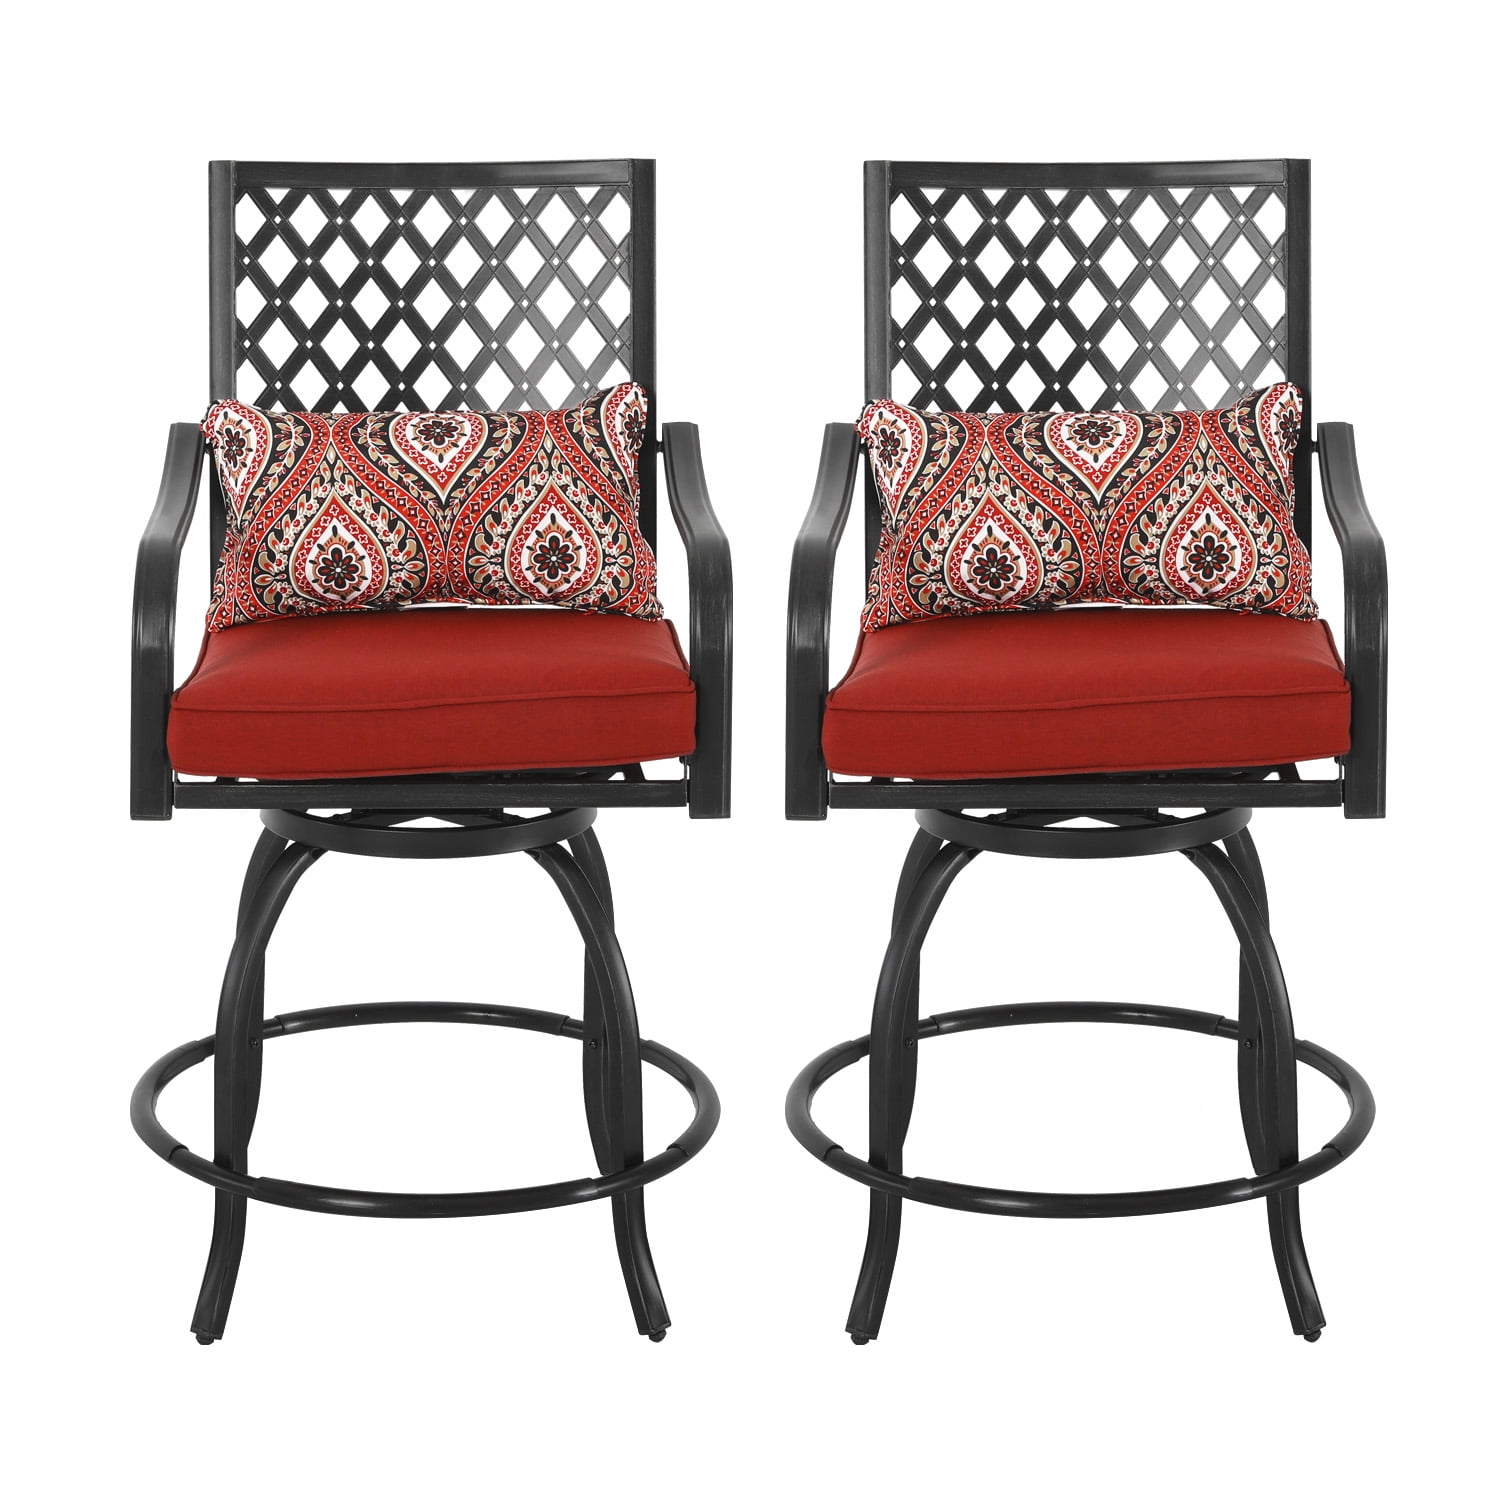 Nuu Garden 2 Piece Outdoor Patio Height, Outdoor Swivel Bar Stools Without Backs